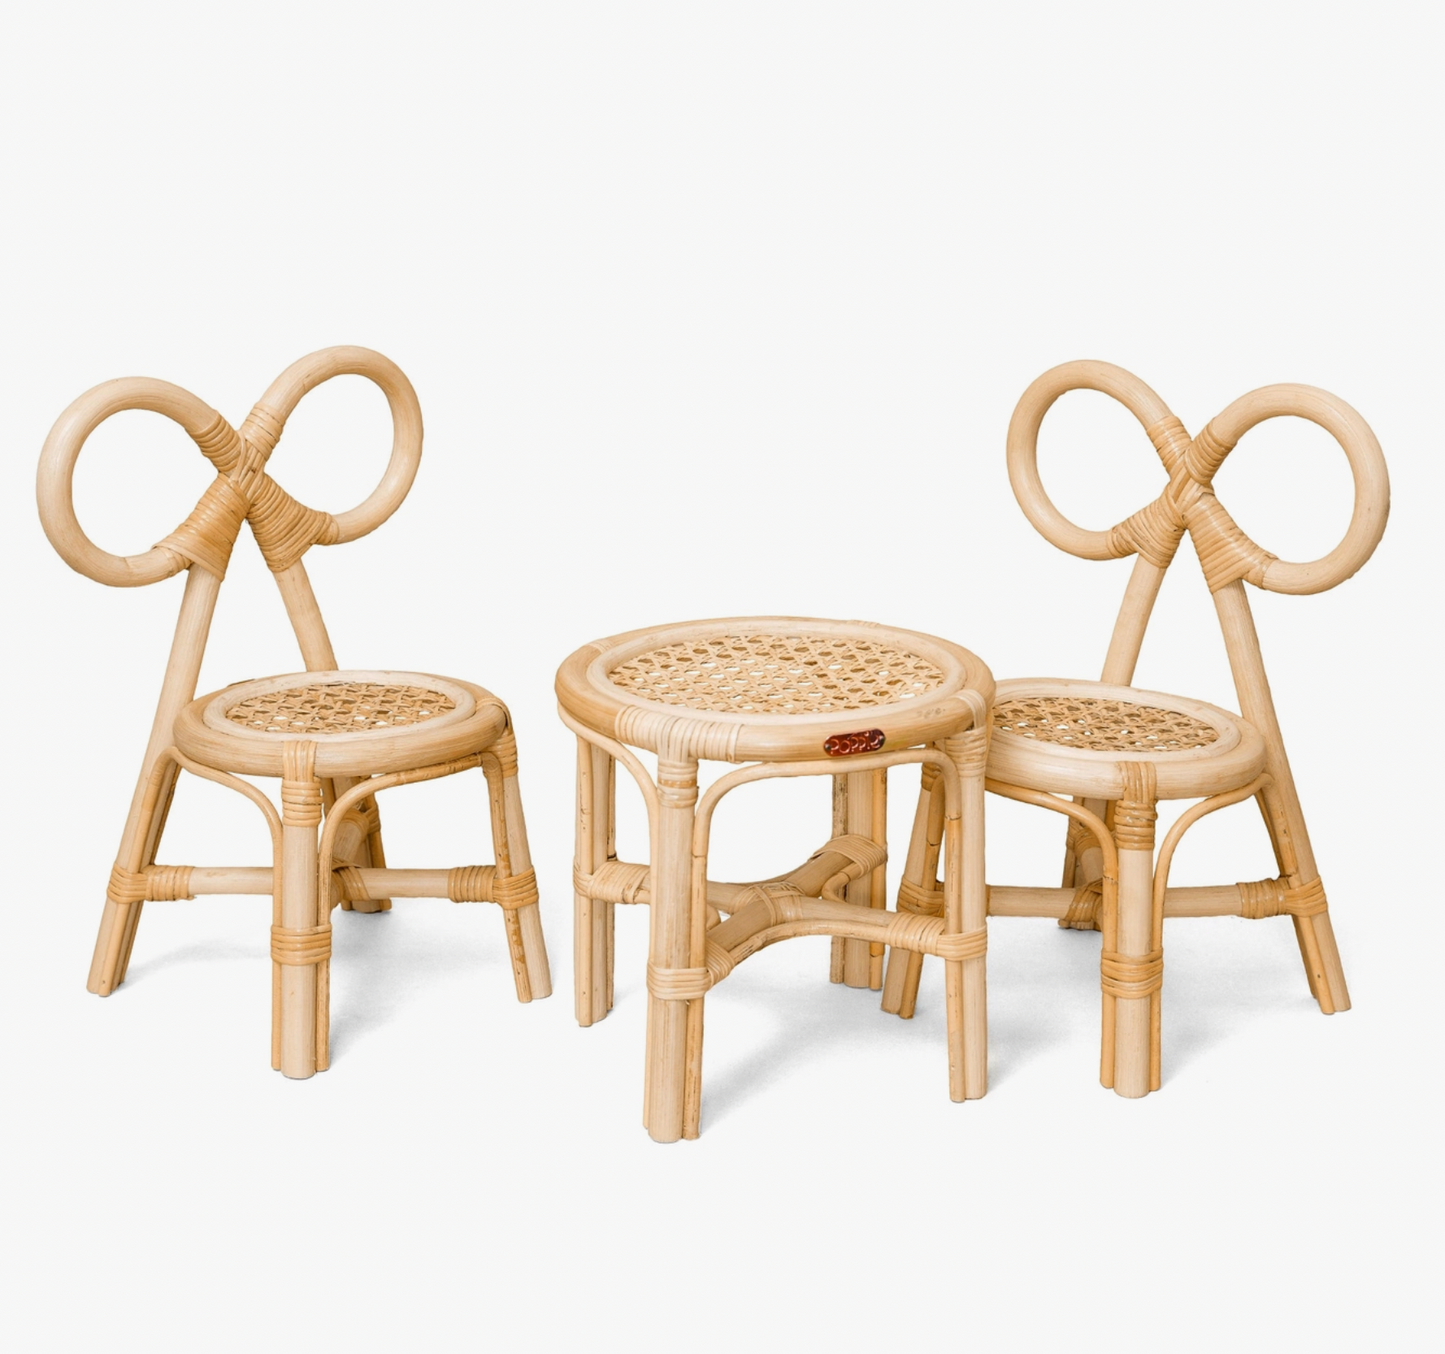 Poppie Mini Table & Chairs Set (Doll Size)